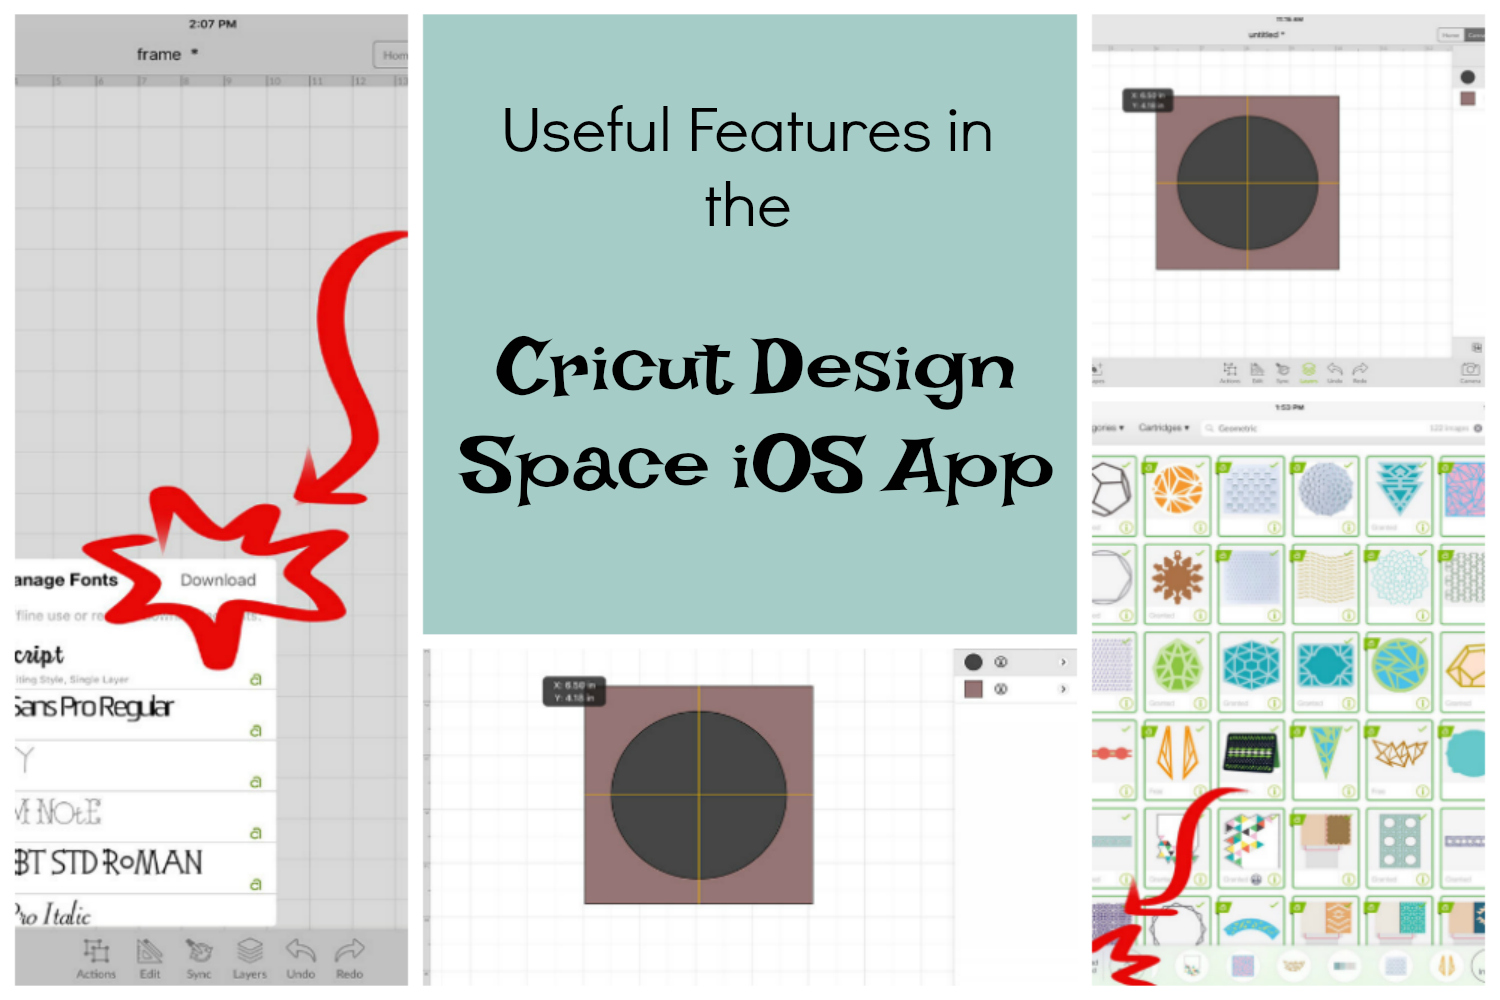 Download Useful Features of the Design Space iOS App - Cricut